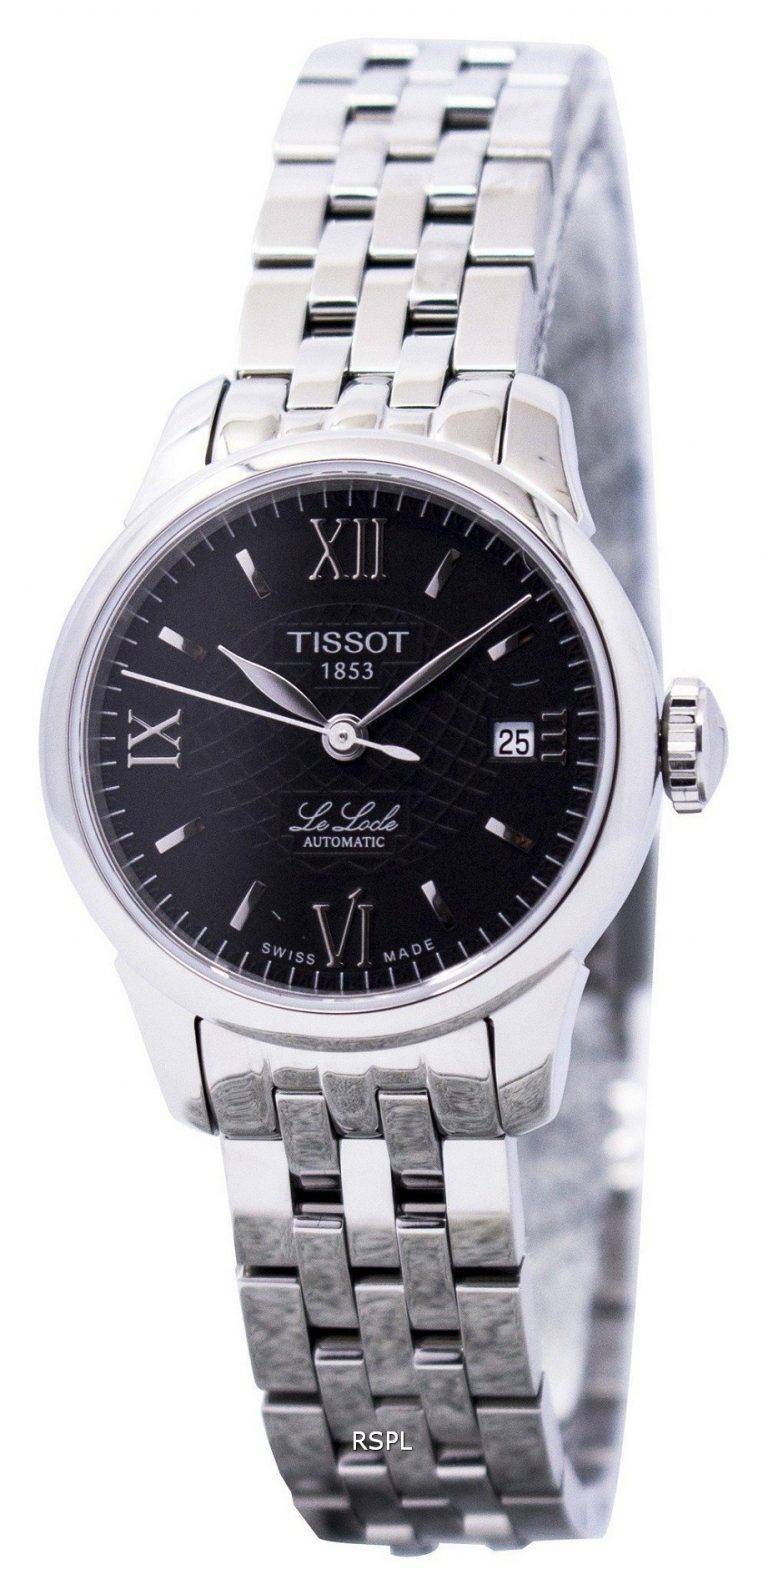 Tissot Watches - Tissot Watches For Sale | Downunderwatches.com